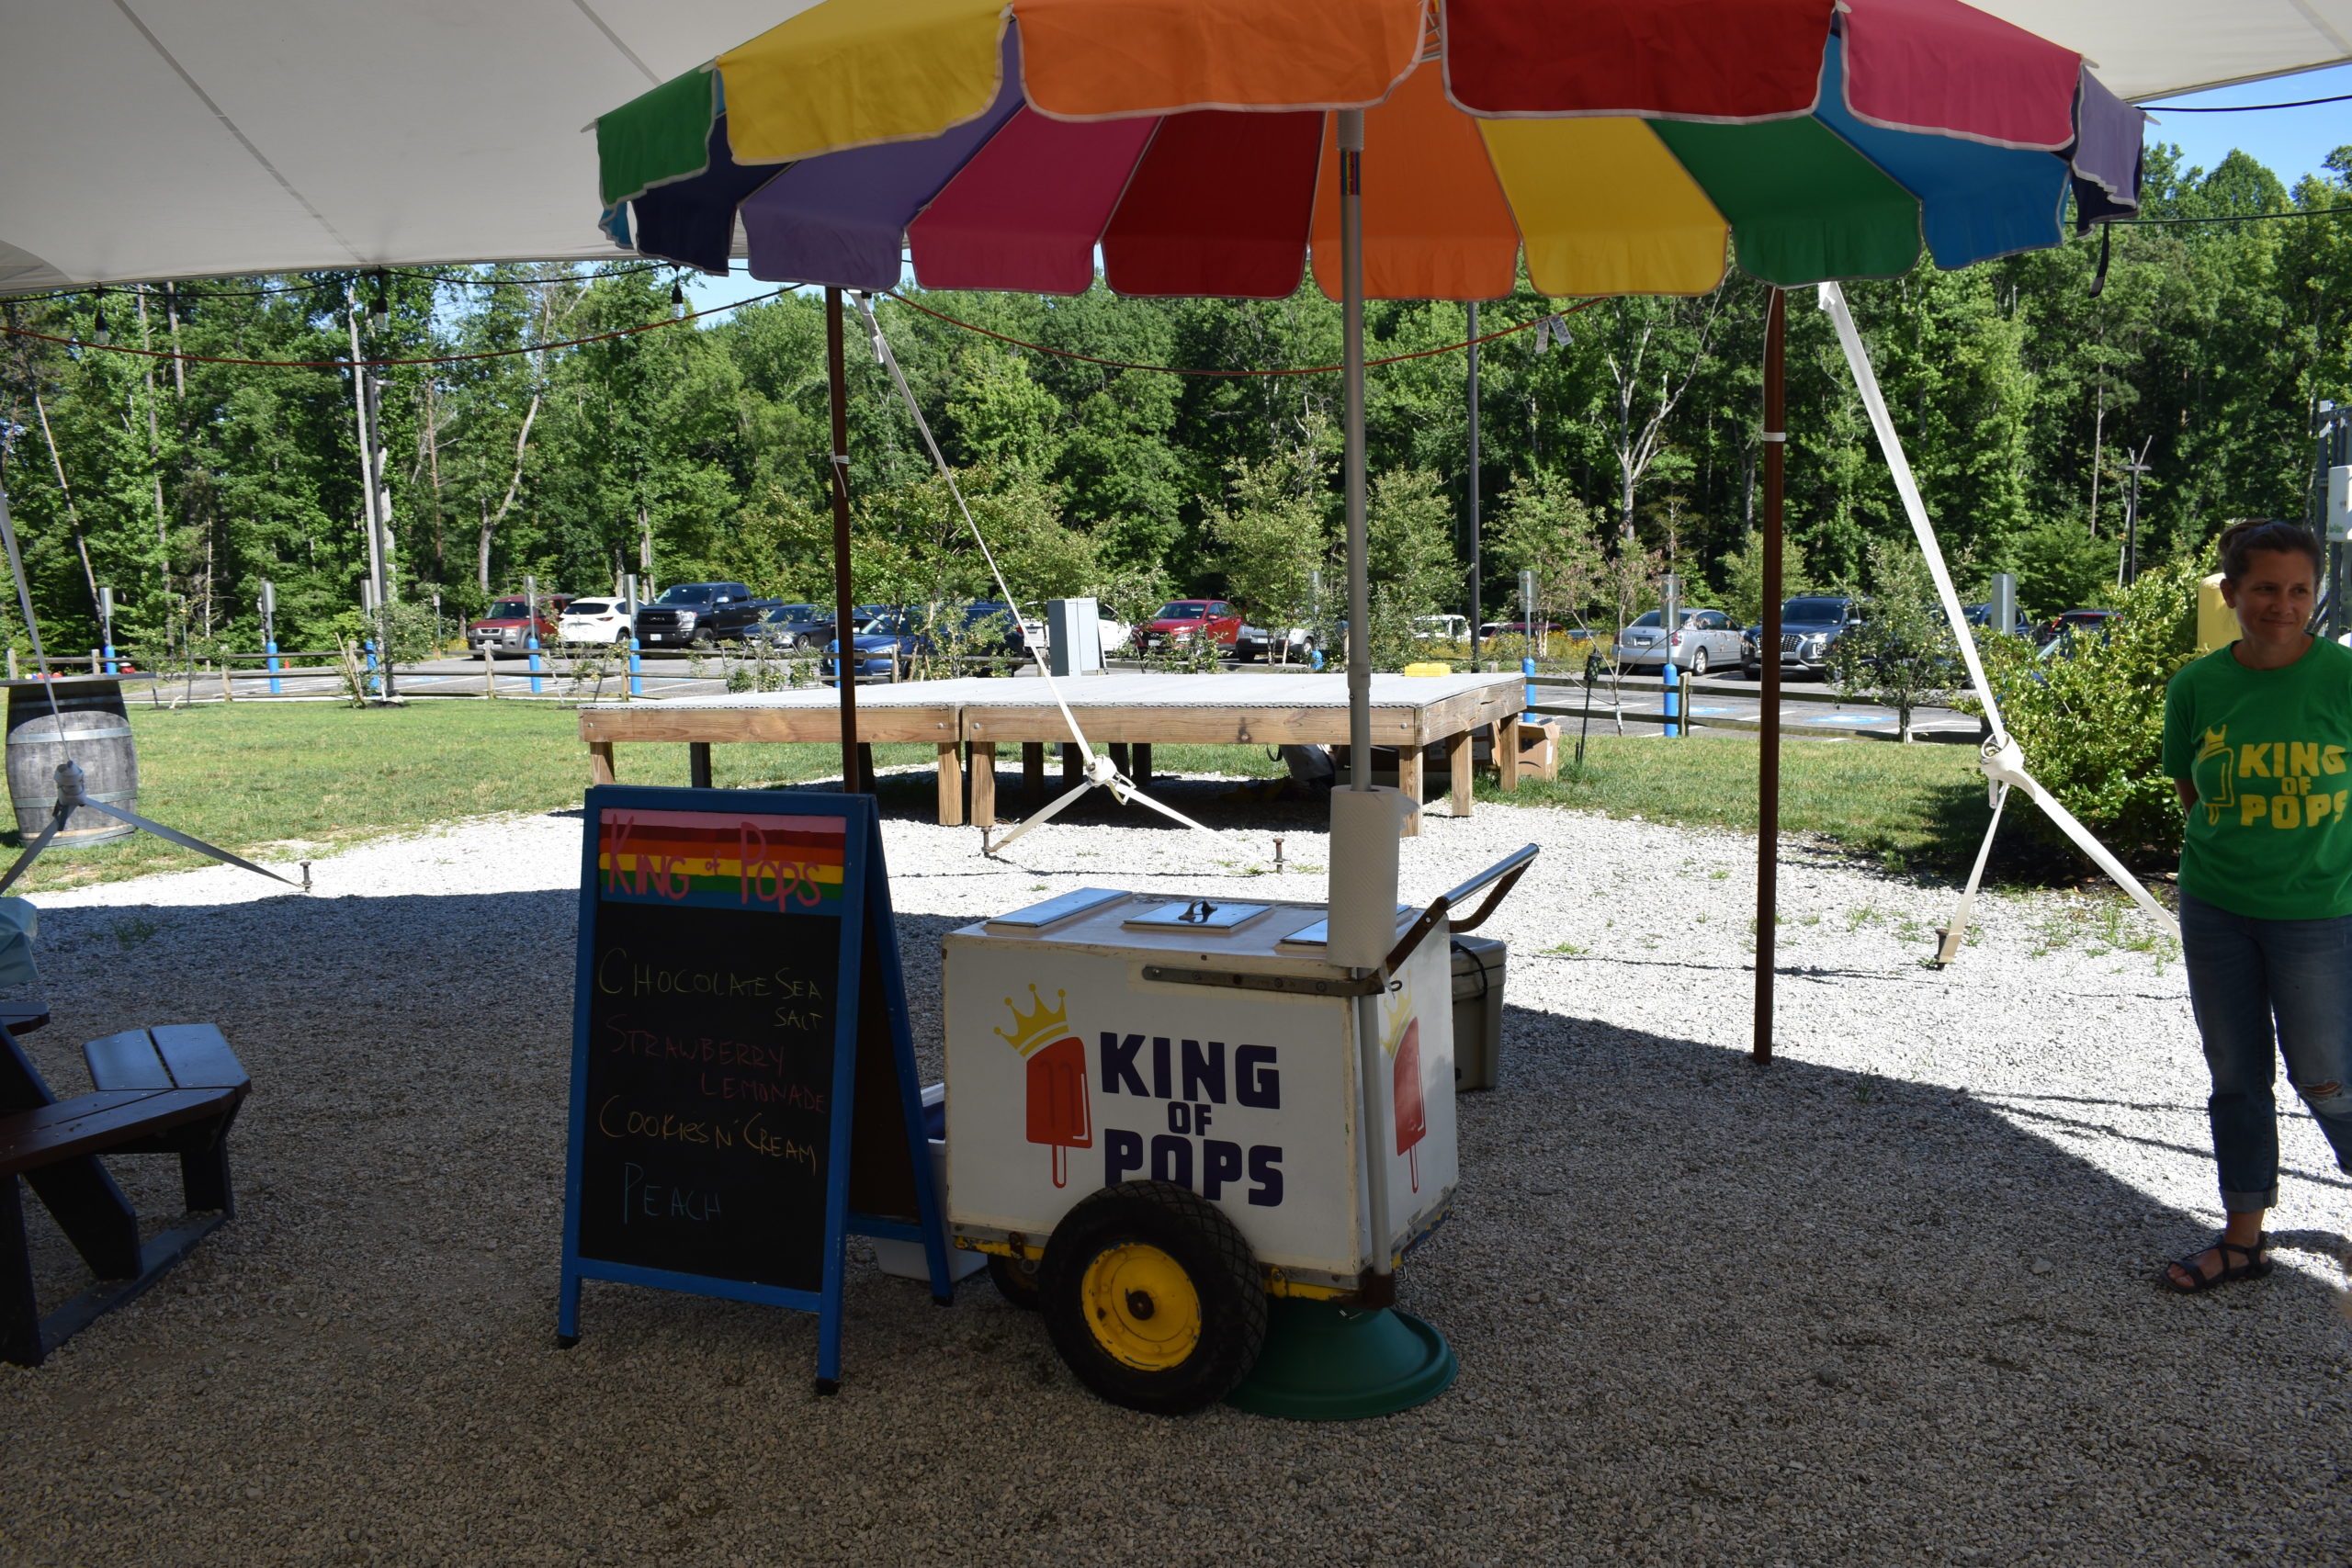 Image a small cart with wheels and text King Of Pops